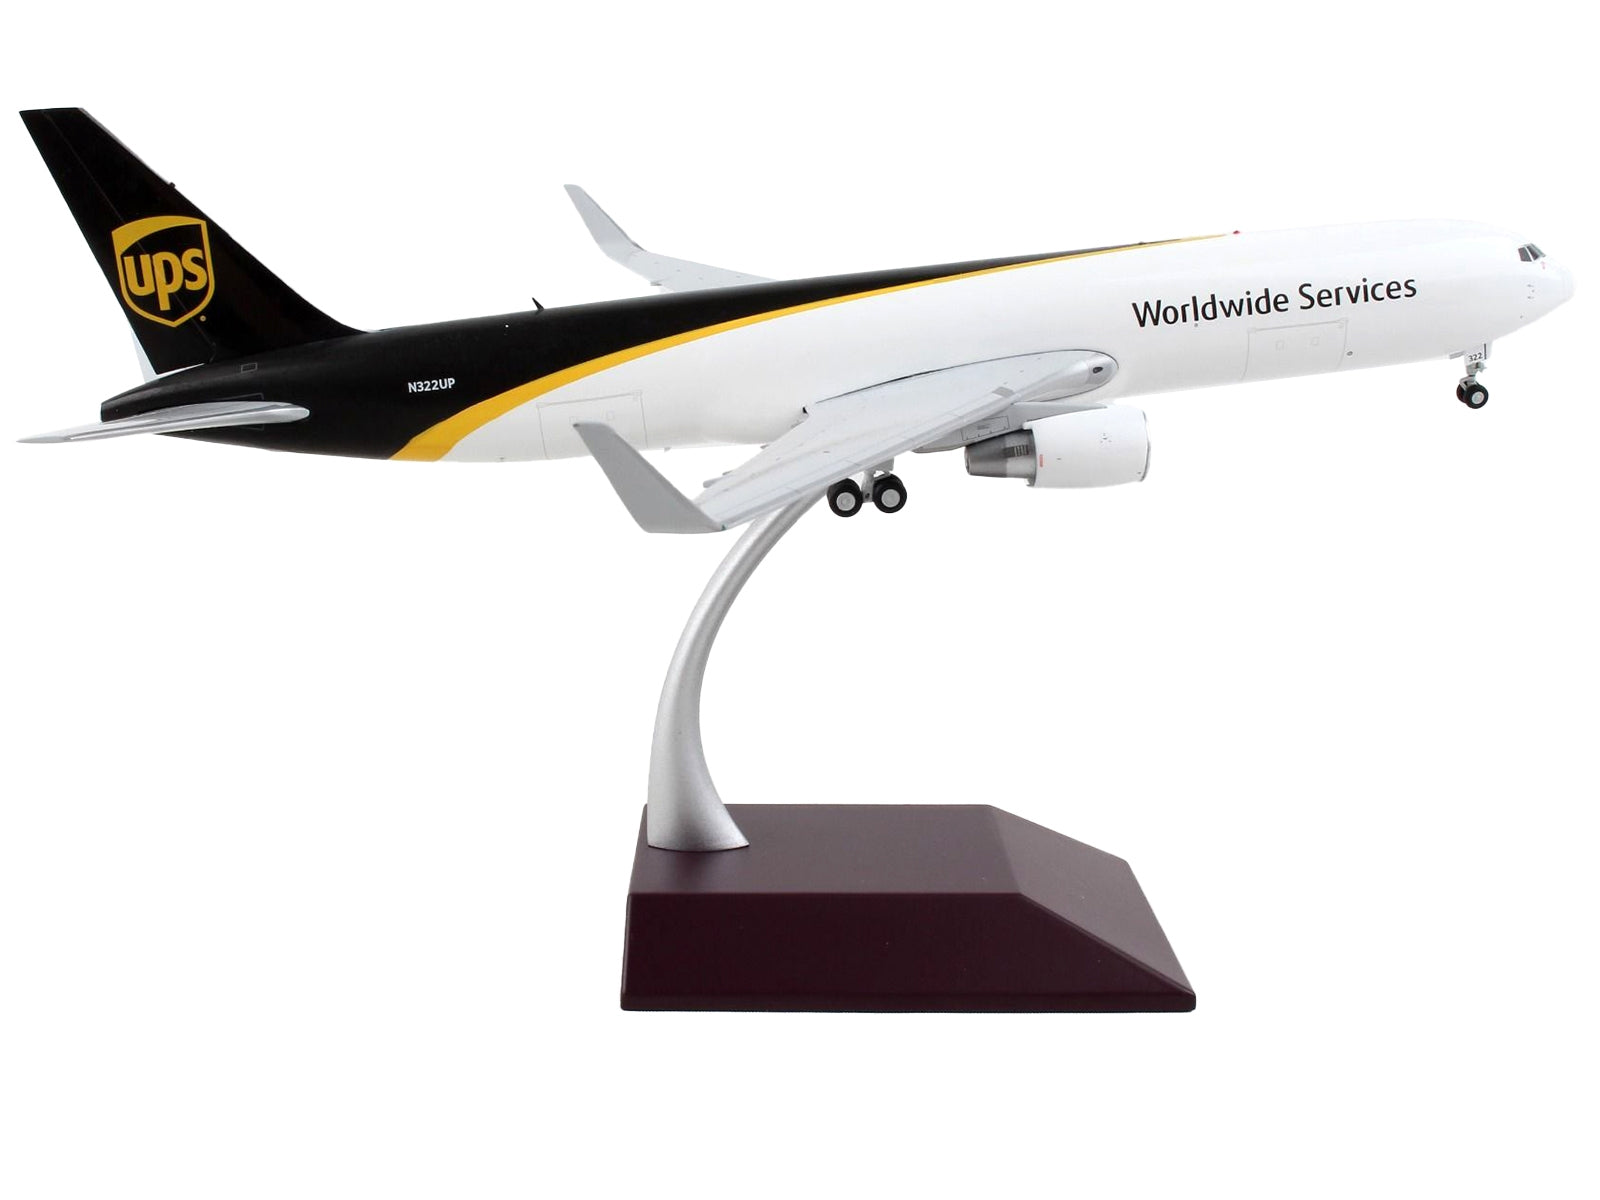 Boeing 767-300F Commercial Aircraft "UPS Worldwide Services" White with Black Tail "Gemini 200" Series 1/200 Diecast Model Airplane by GeminiJets